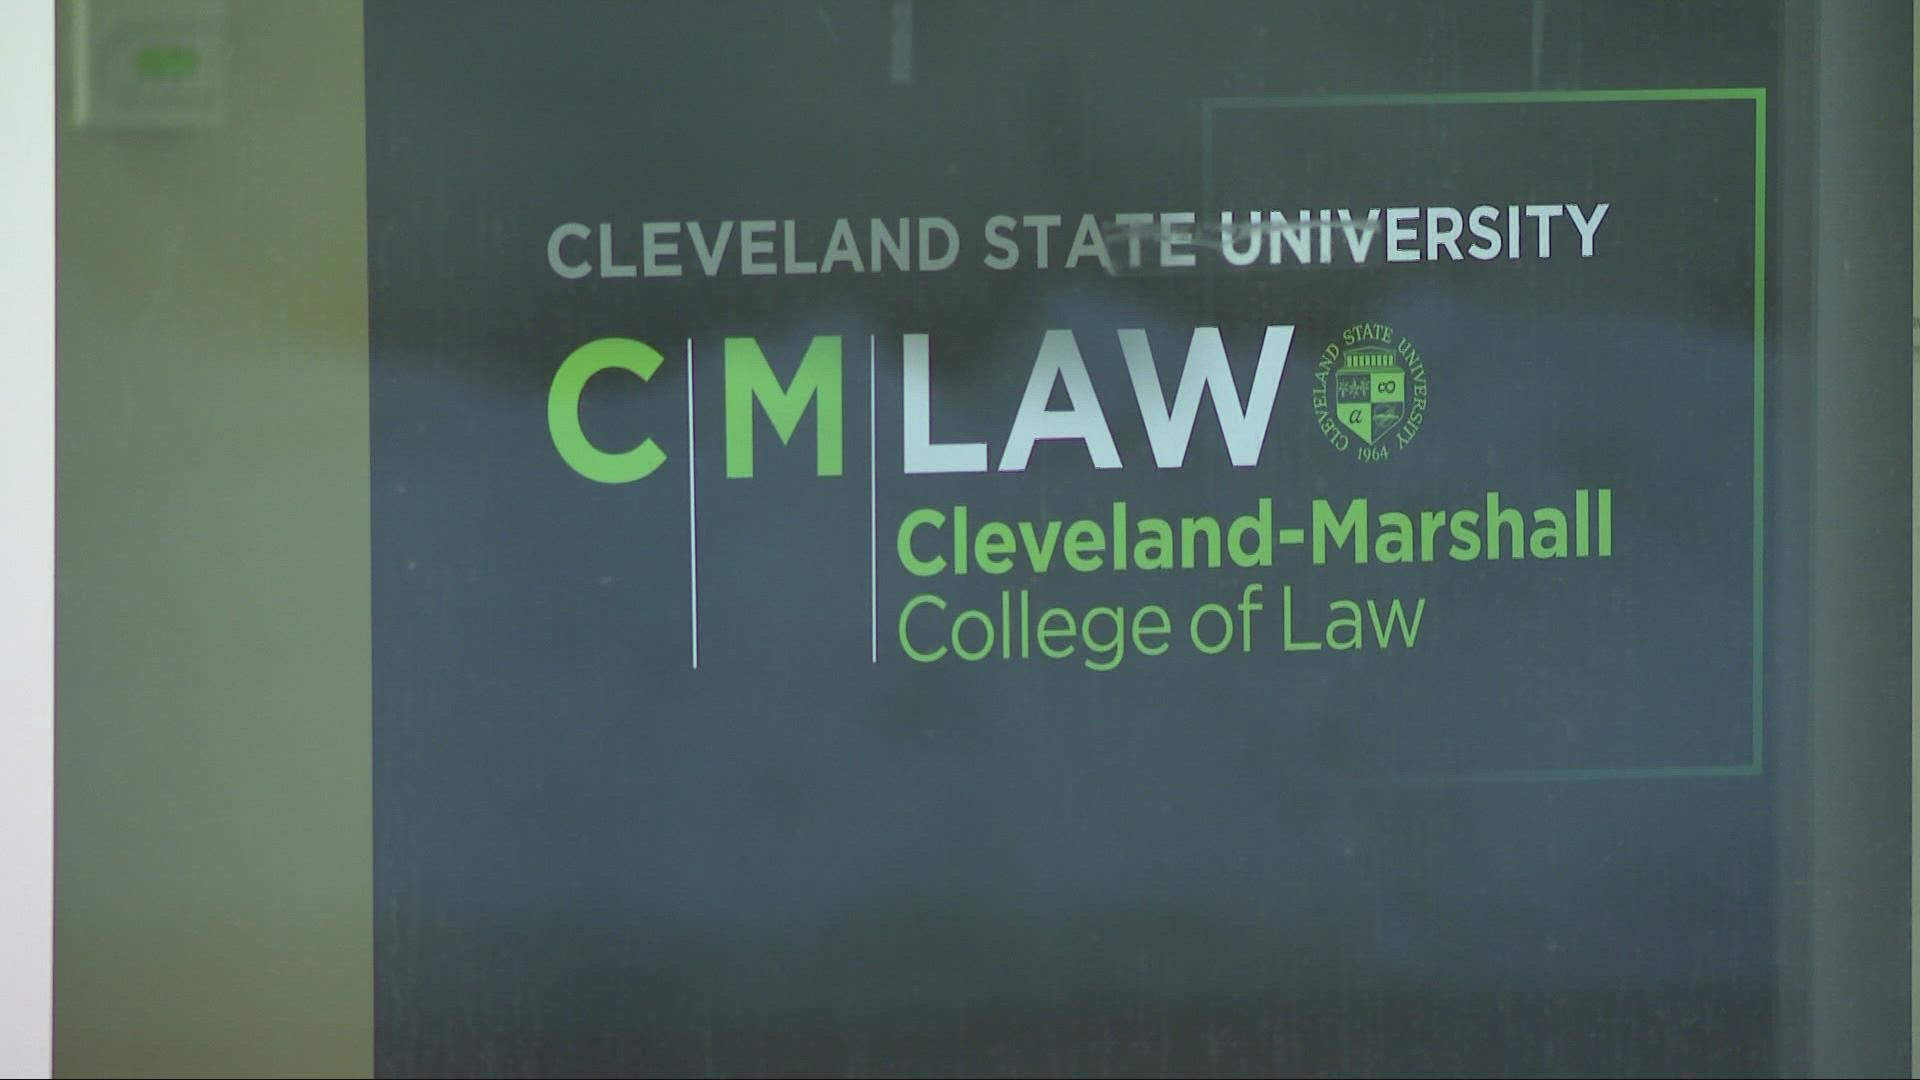 The College of Law had been named in part after former U.S. Supreme Court Chief Justice John Marshall, who owned slaves.